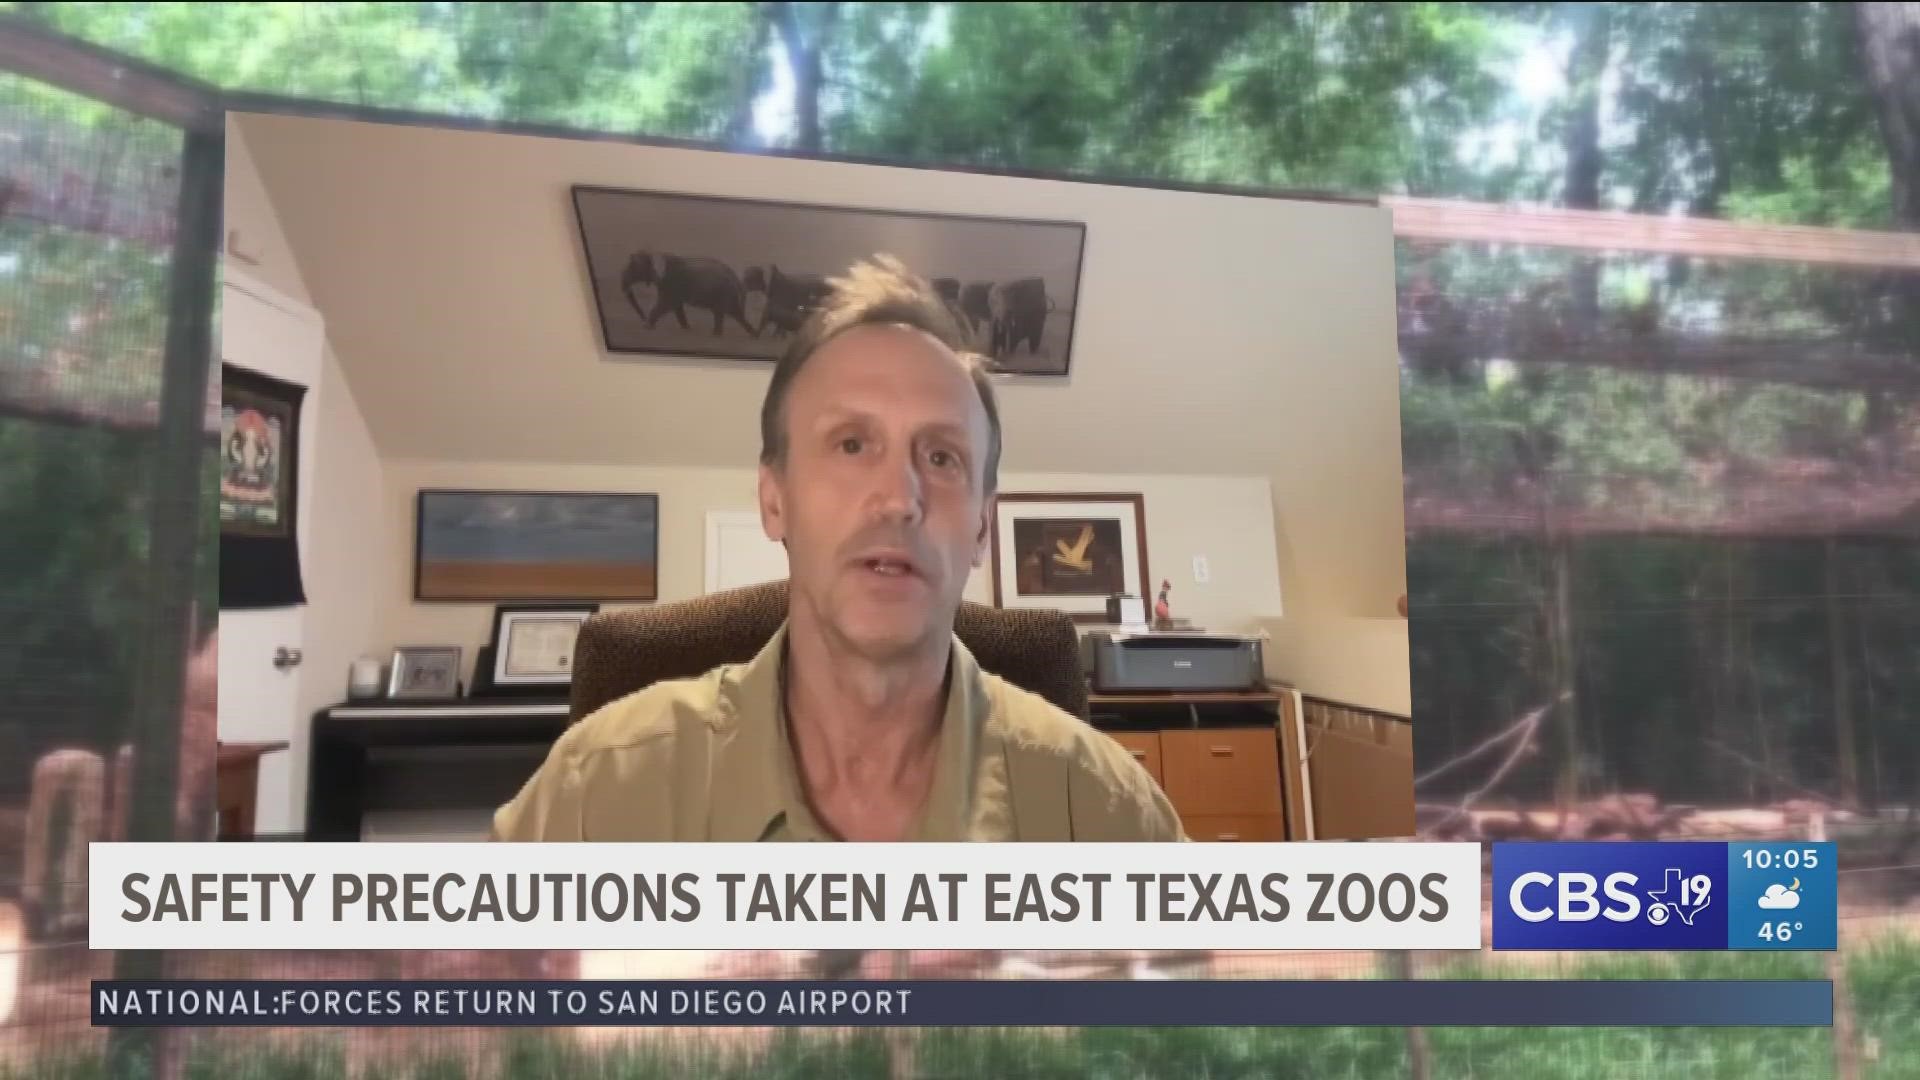 Safety precautions take an East Texas zoos